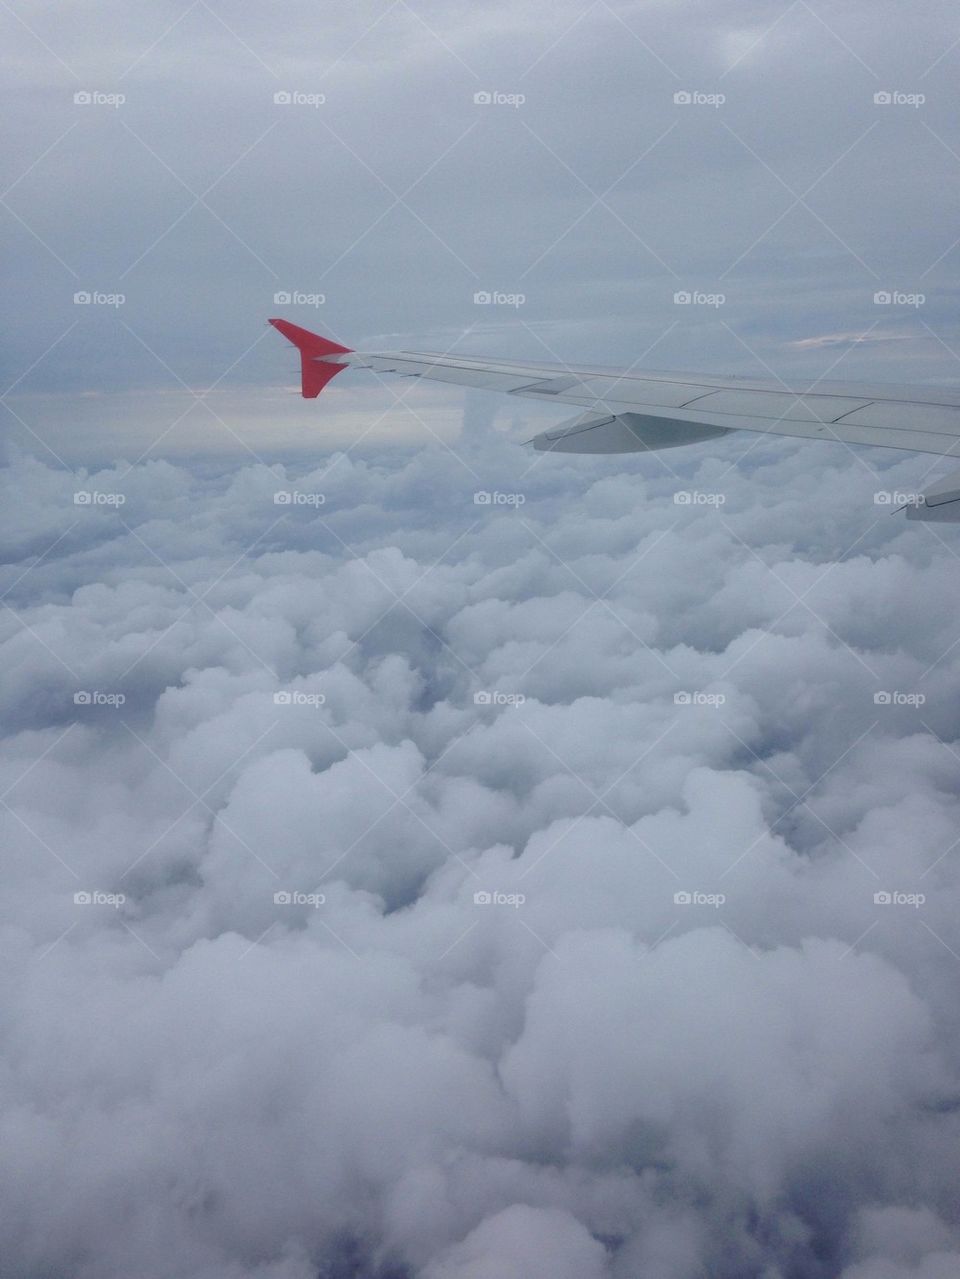 In the clouds